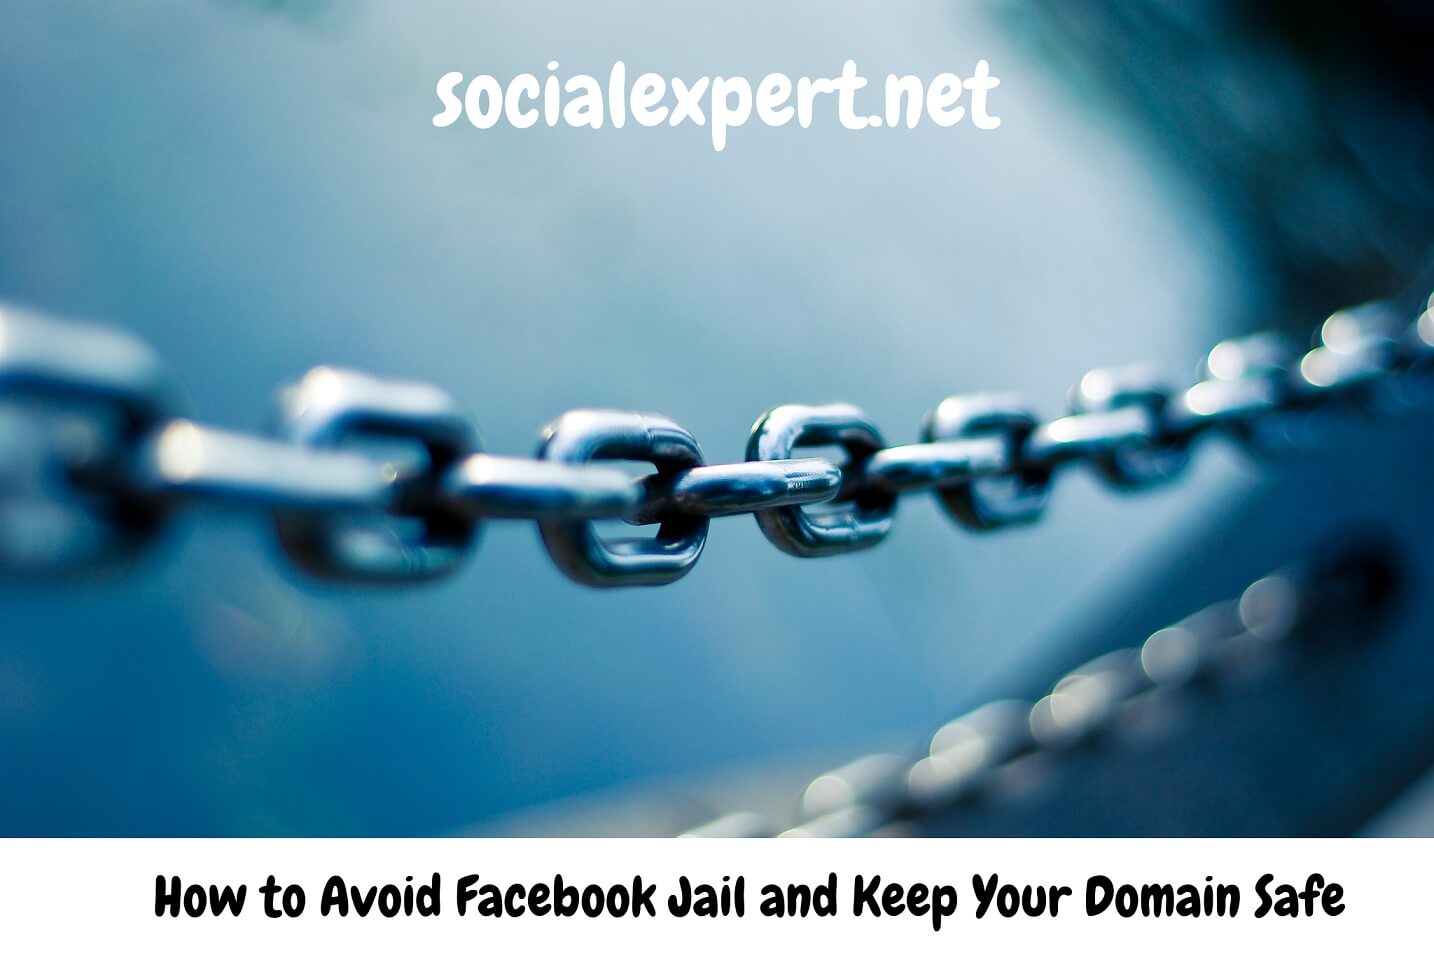 How to Avoid Facebook Jail and Keep Your Domain Safe